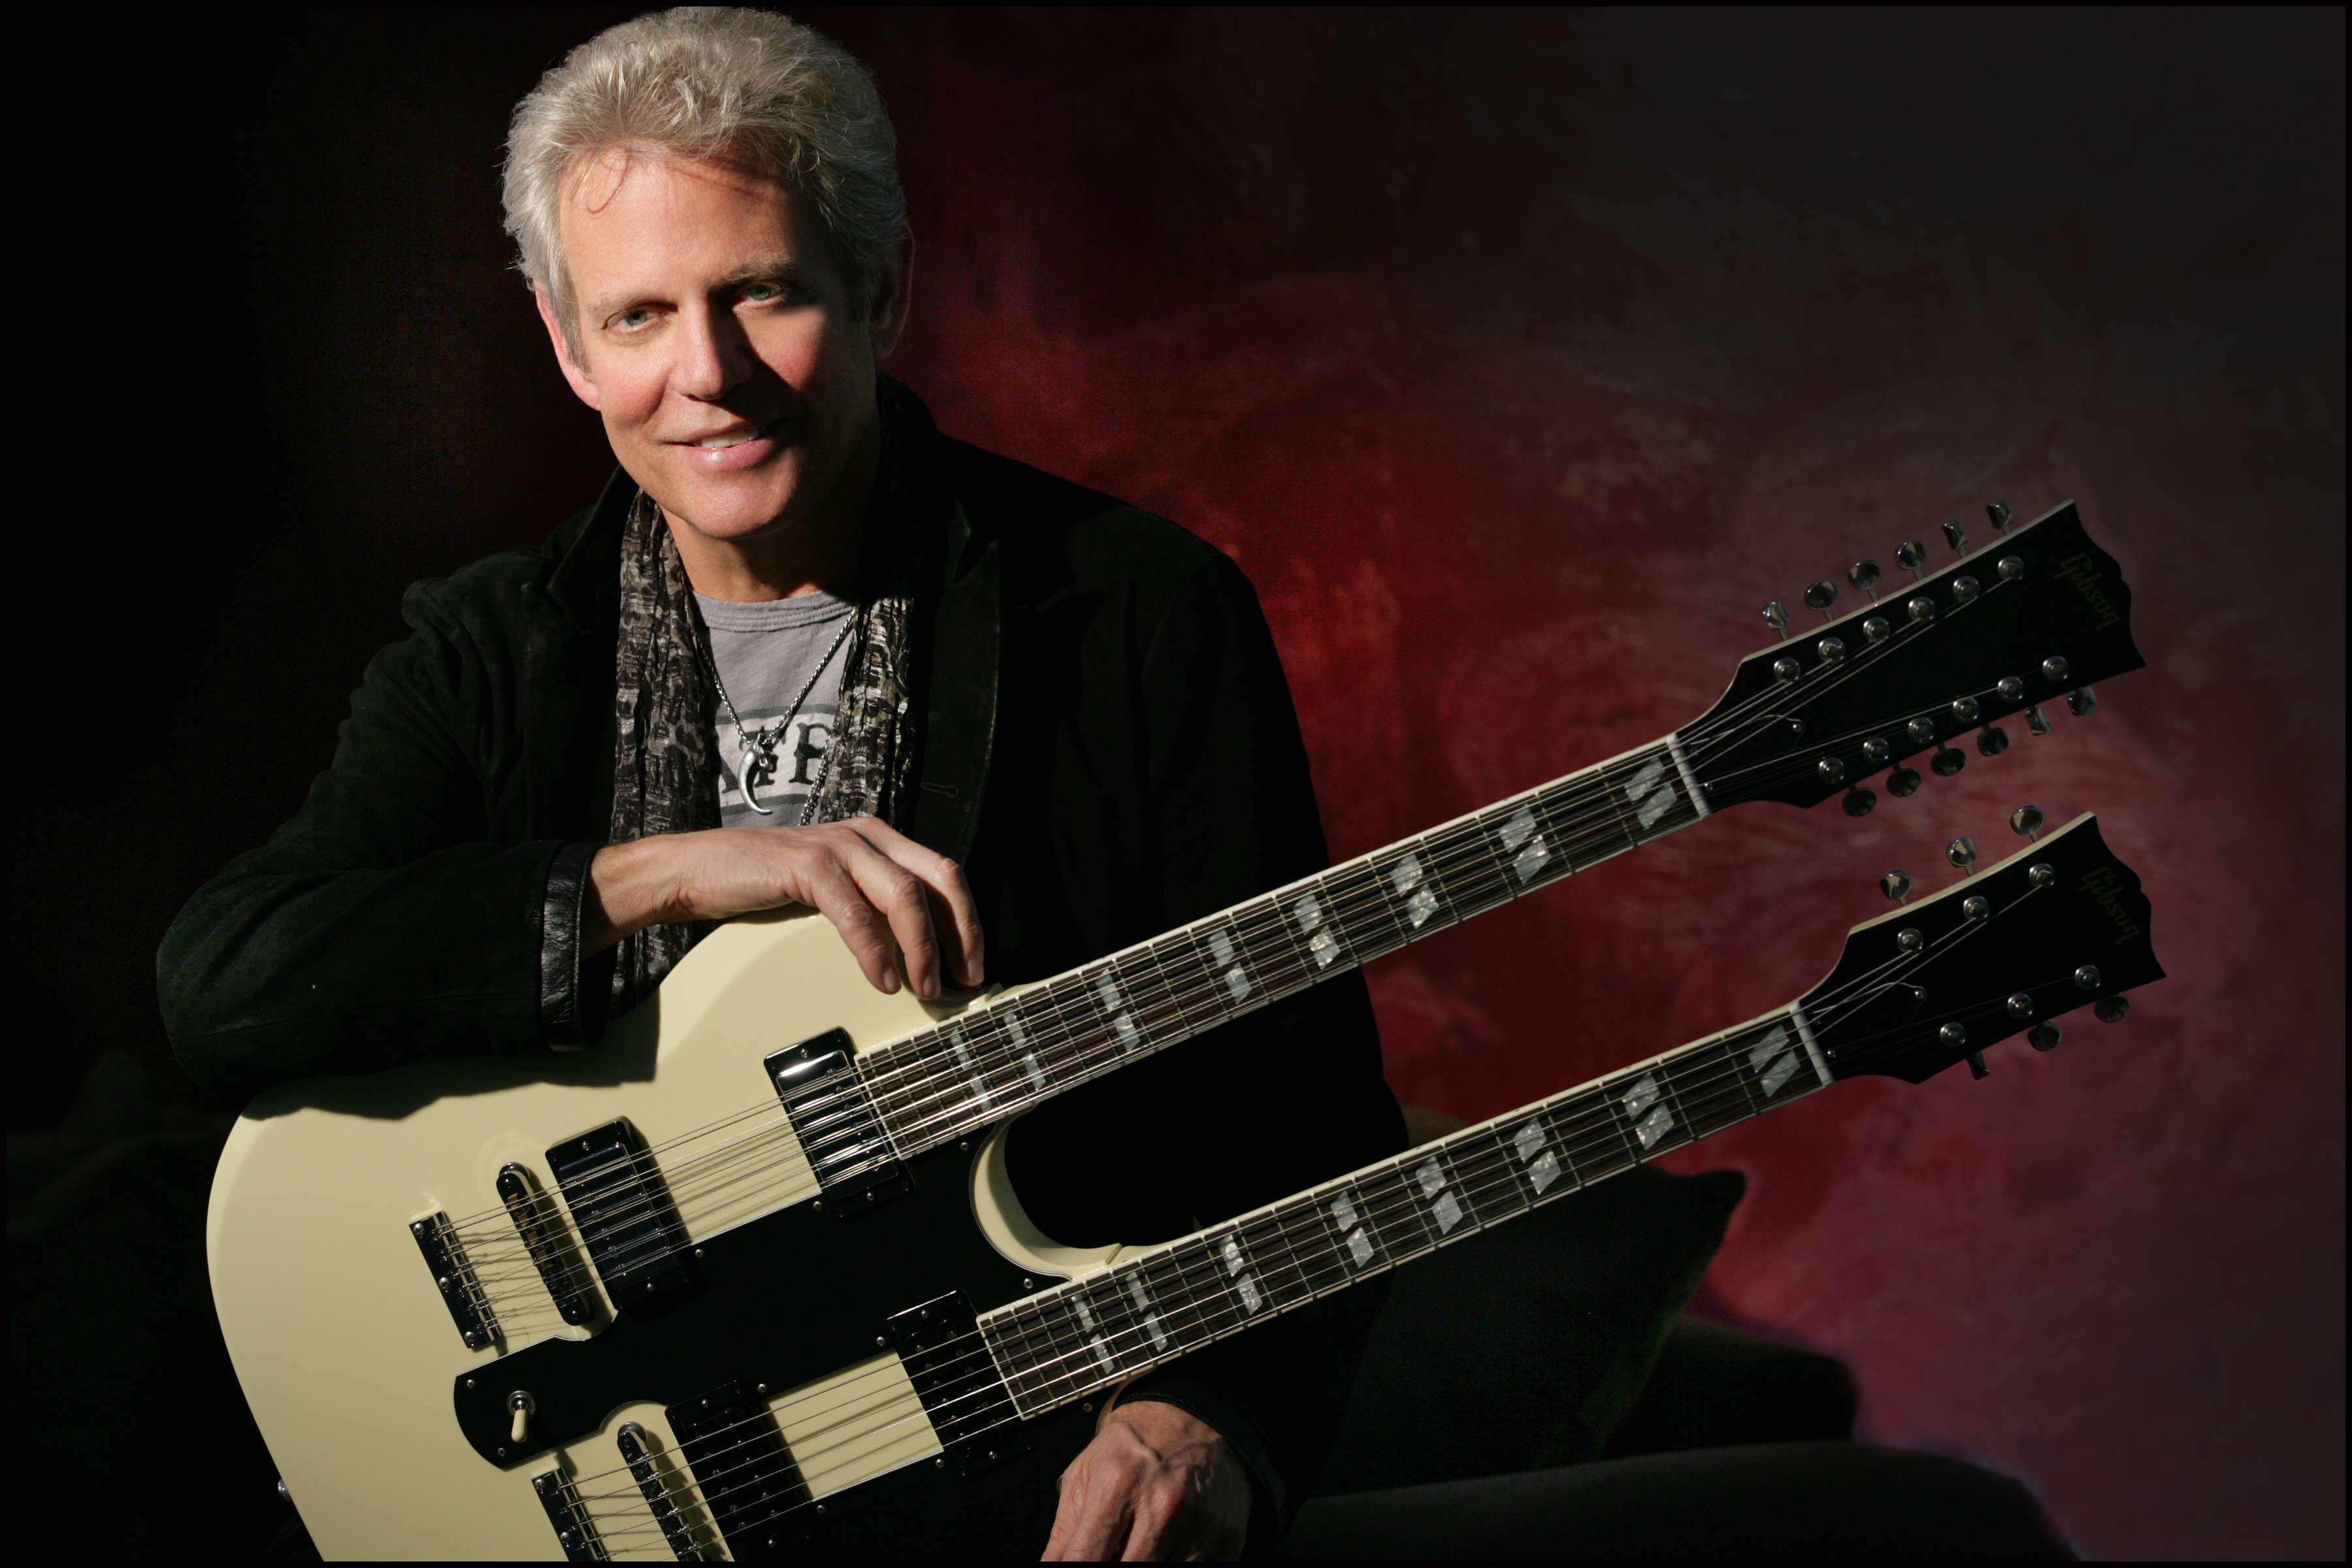 Don Felder will perform at the Convention and Exhibition Centre in Wan Chai next month.